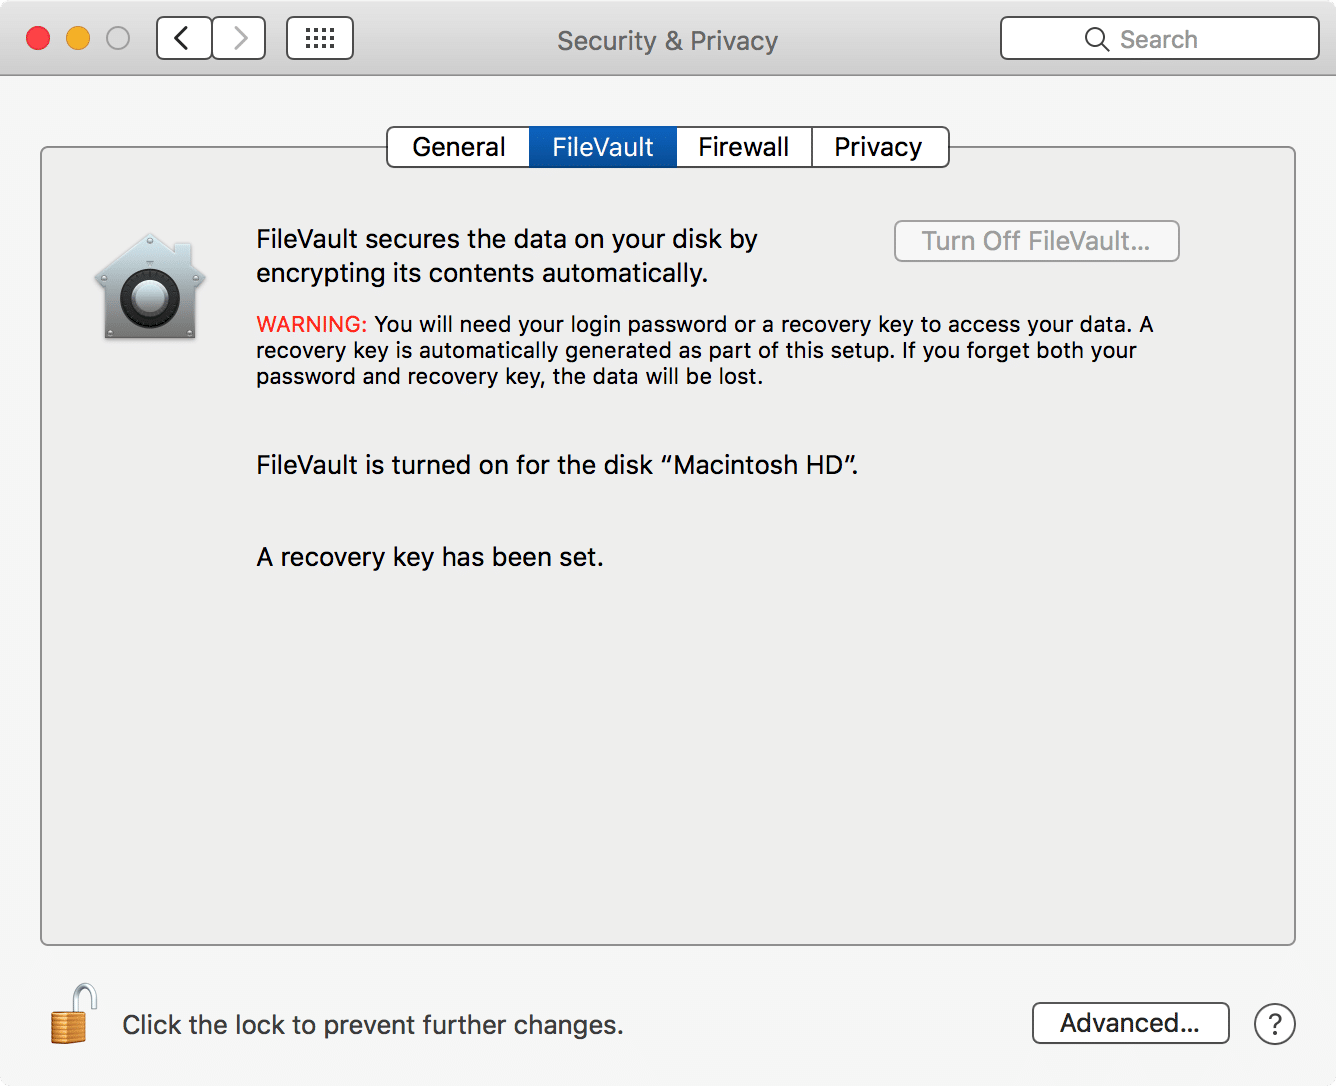 Profile to Enable FileVault 2 only filevault